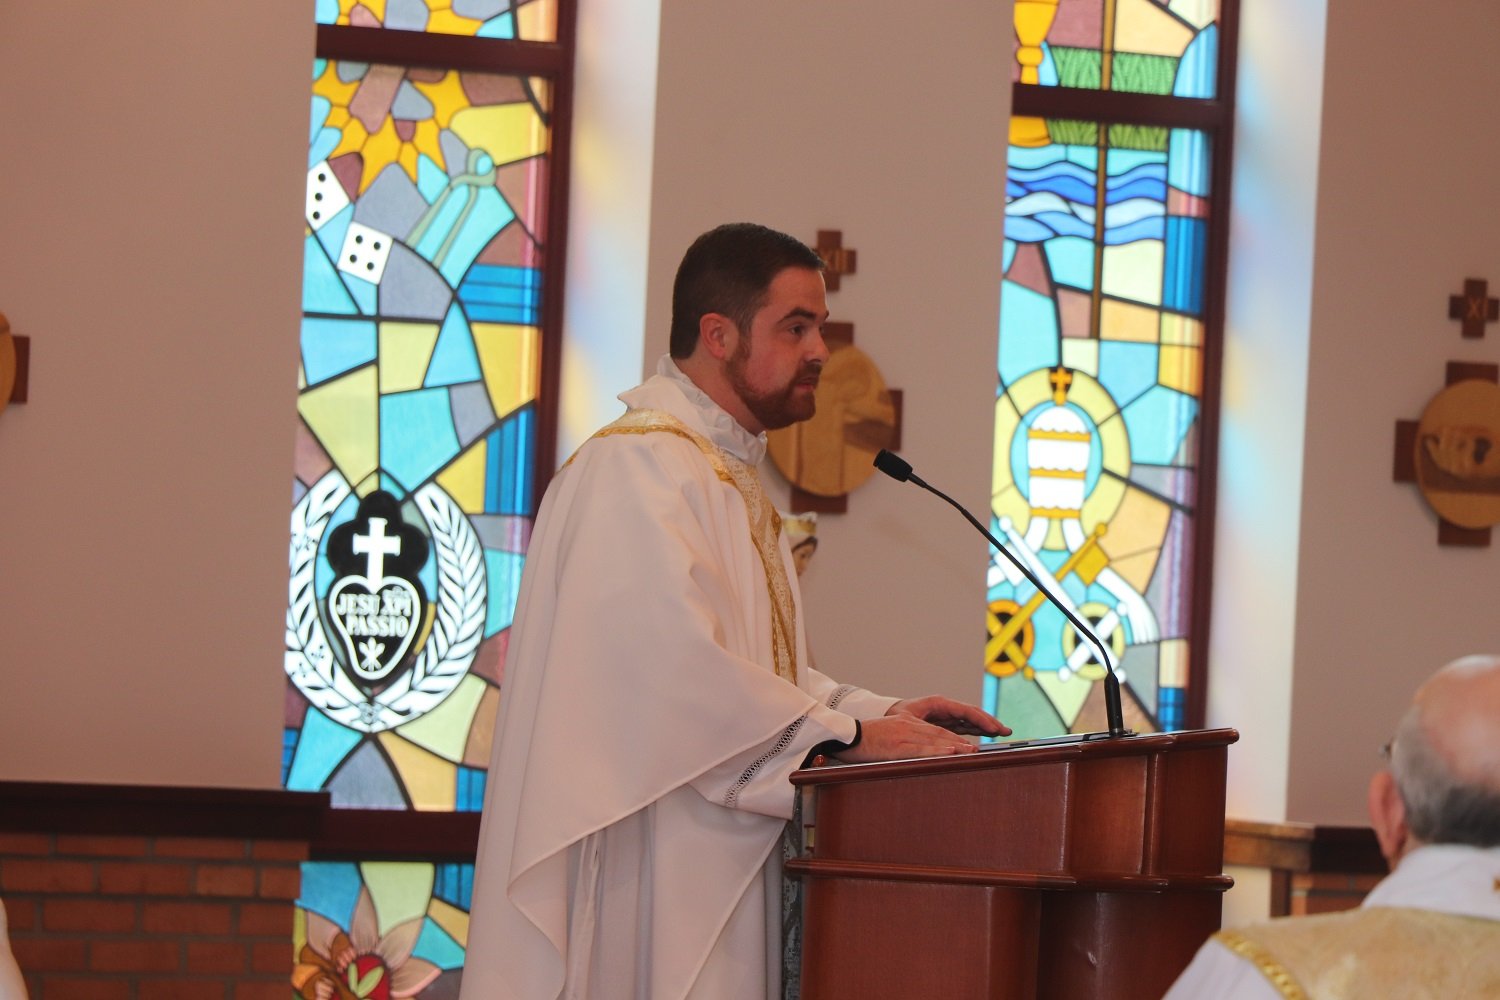  Fr. Corey Bruns gave a meaningful (and at times humorous!) homily about the importance of choosing to dwell “in the Lord’s courts.” He also underlined the significance of a providential “coincidence” — the date of the Jubilee Mass was Mother’s 50th 